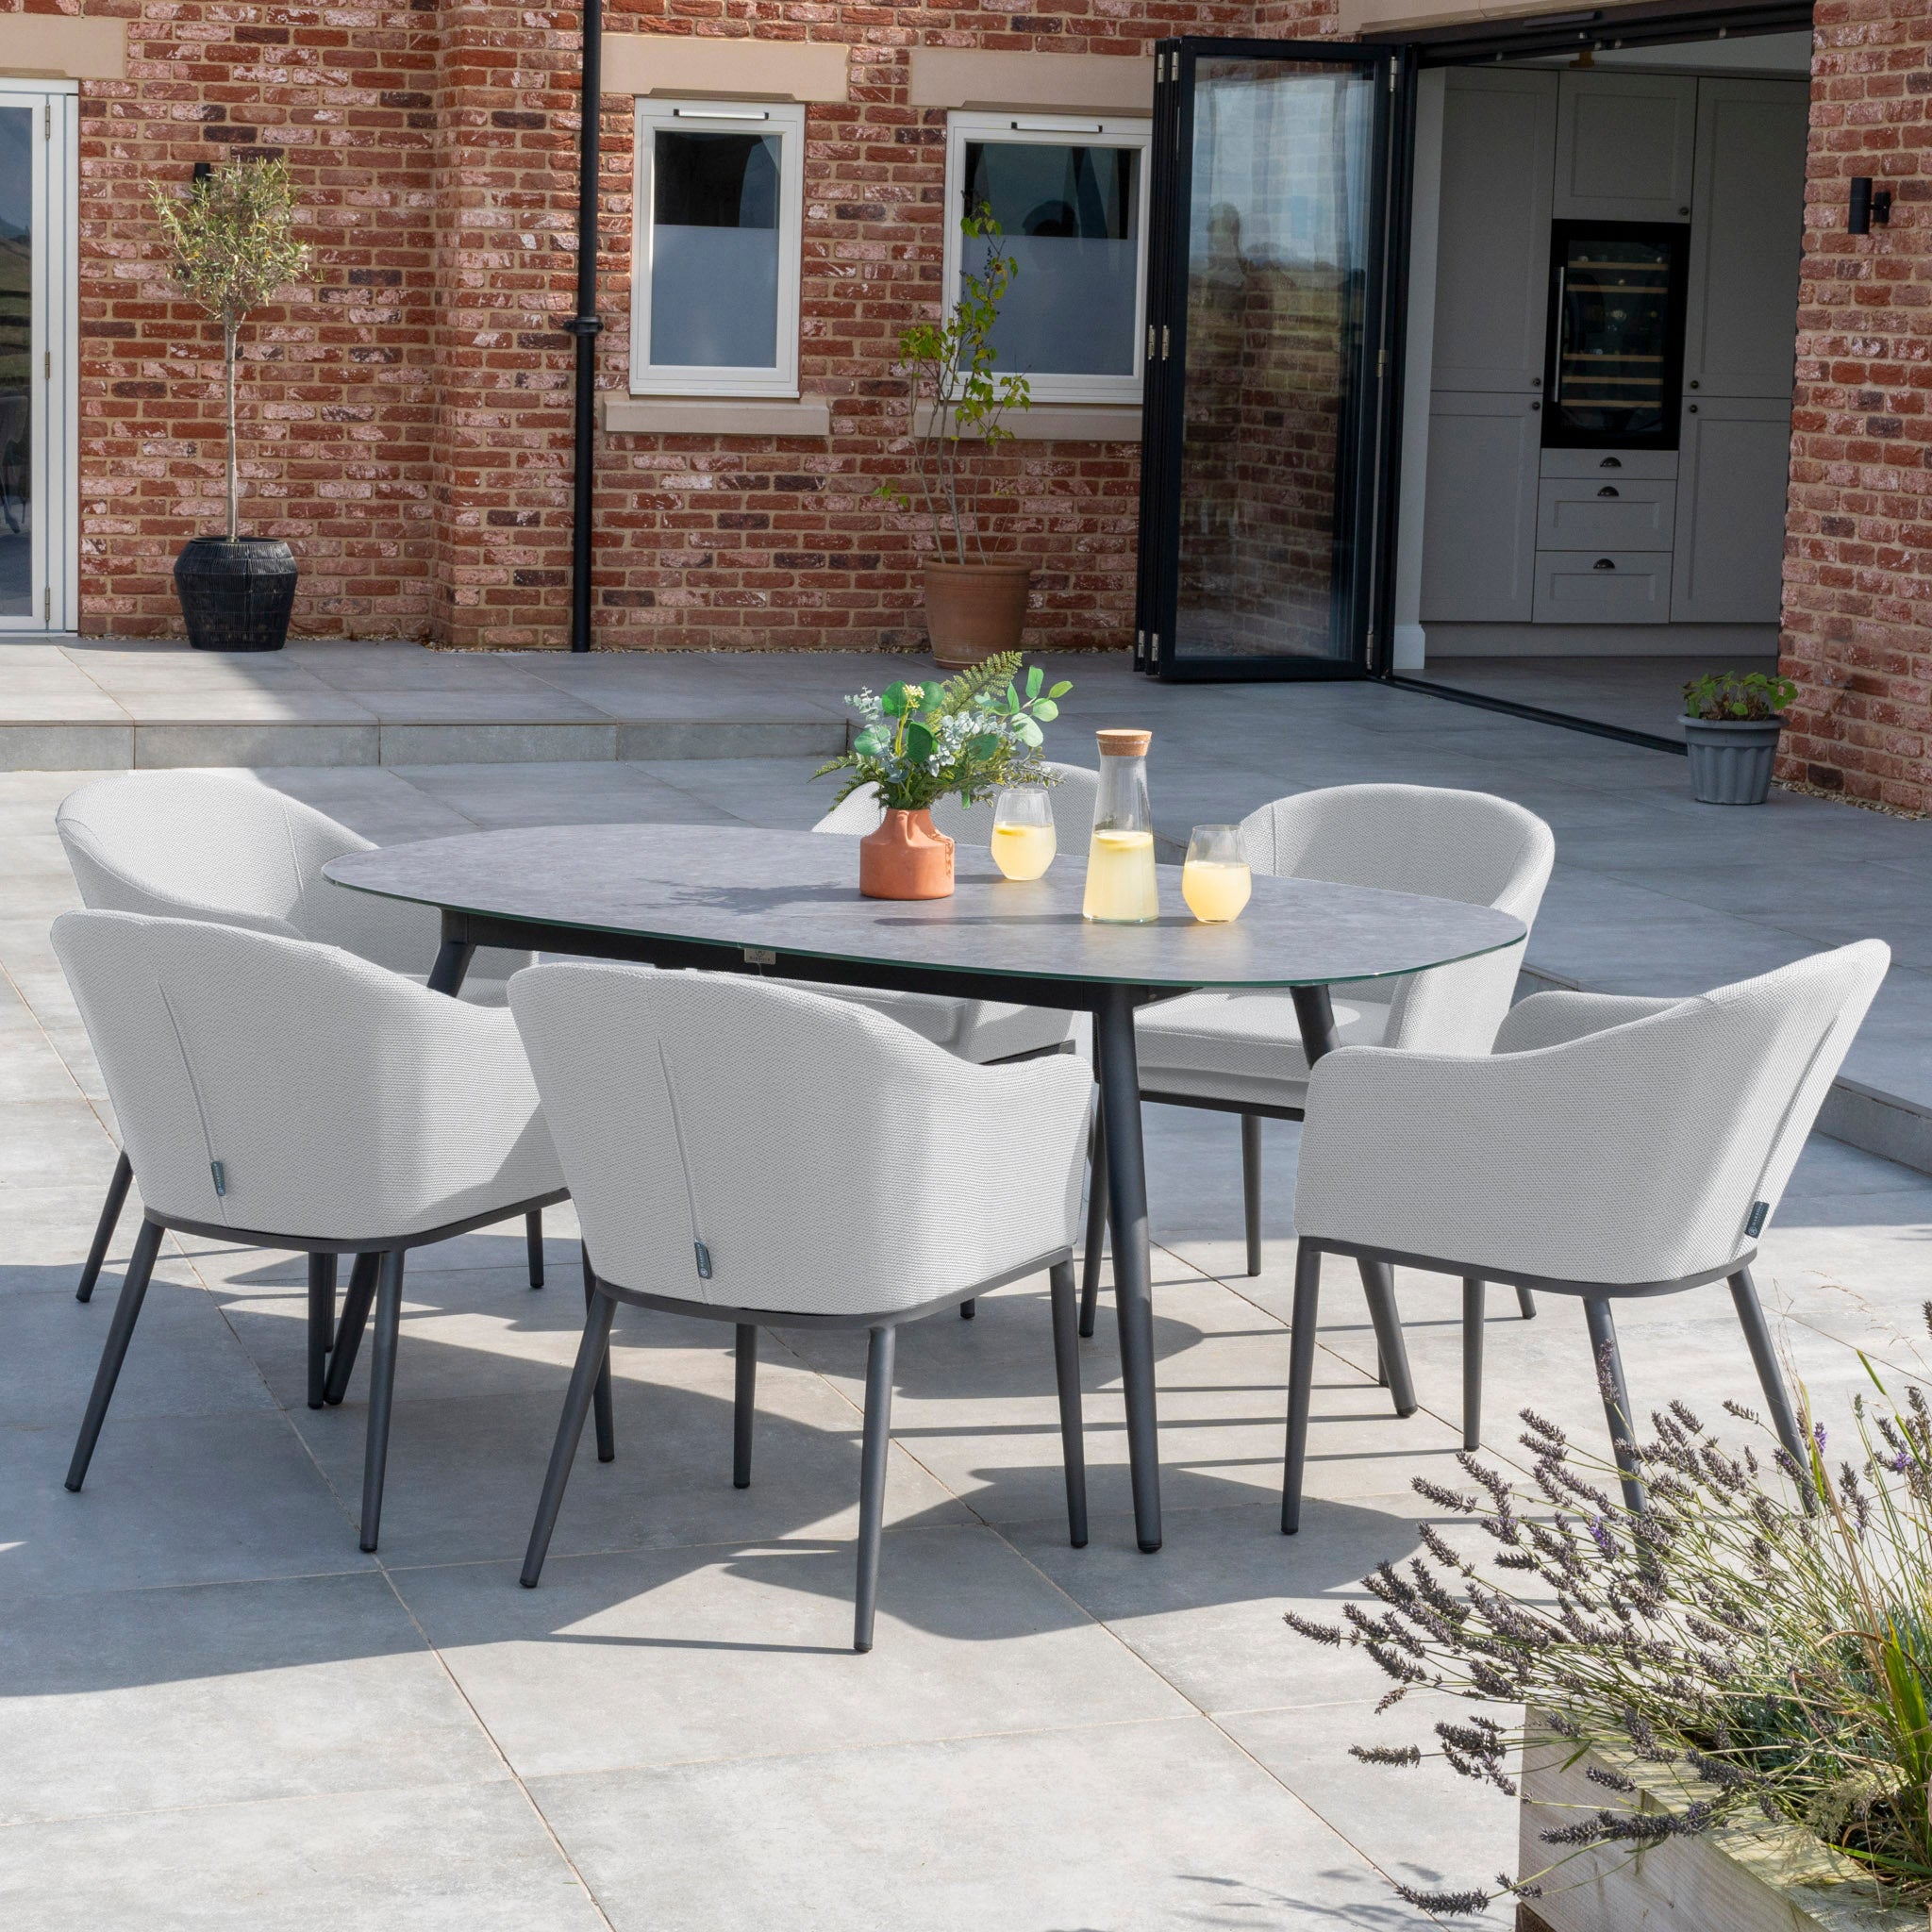 Luna 6 Seat Outdoor Fabric Oval Ceramic Dining Set in Oyster Grey